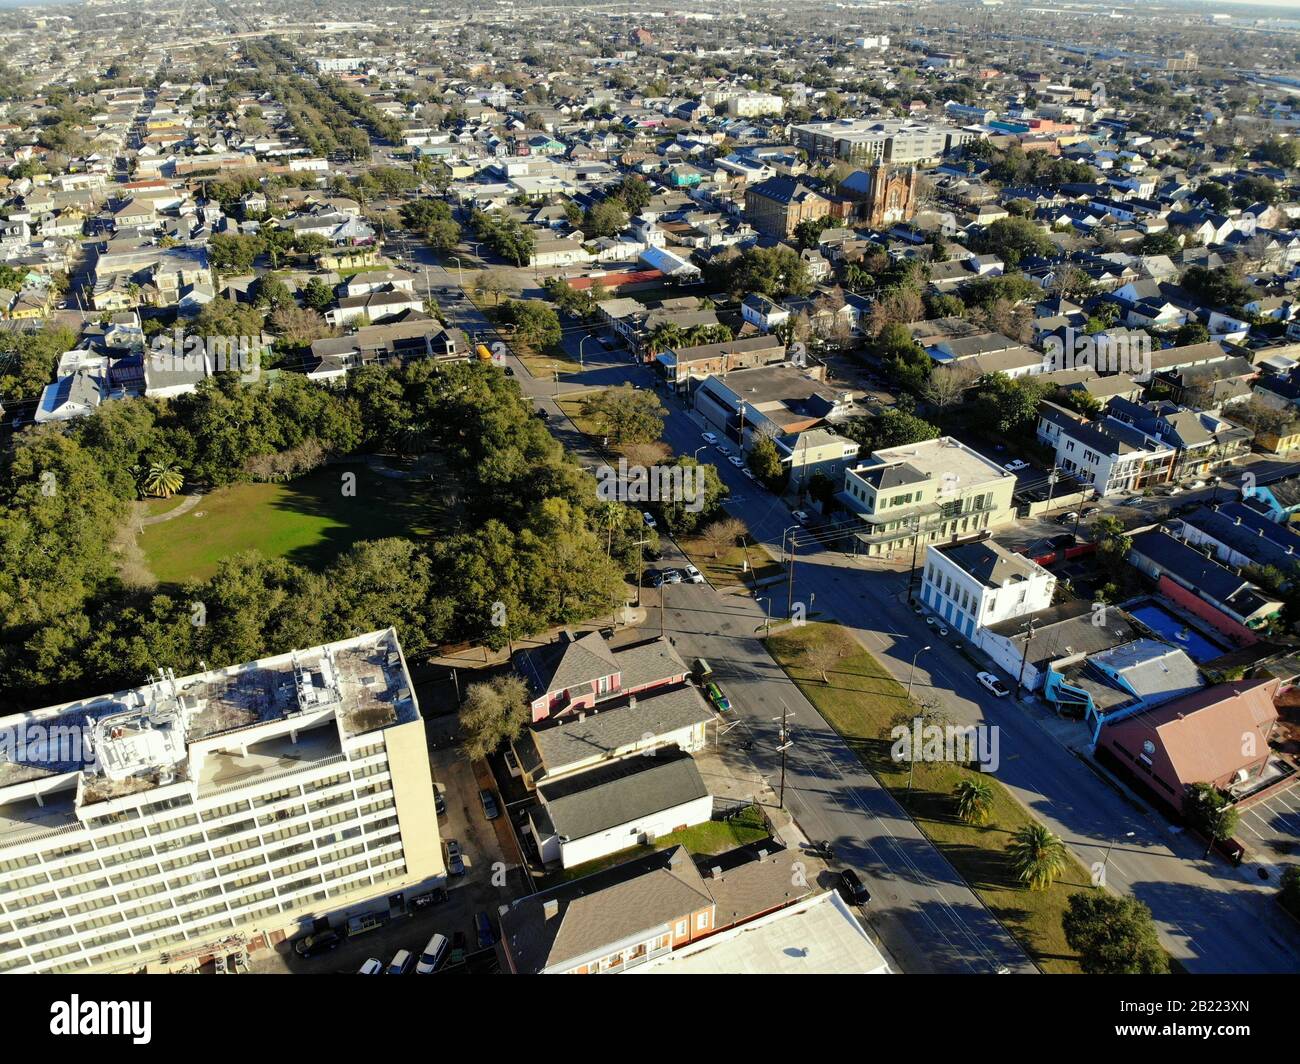 New Orleans, Louisiana, U.S.A - February 7, 2020 - The aerial view of the residential areas, traffic and buildings on French Quarter Stock Photo